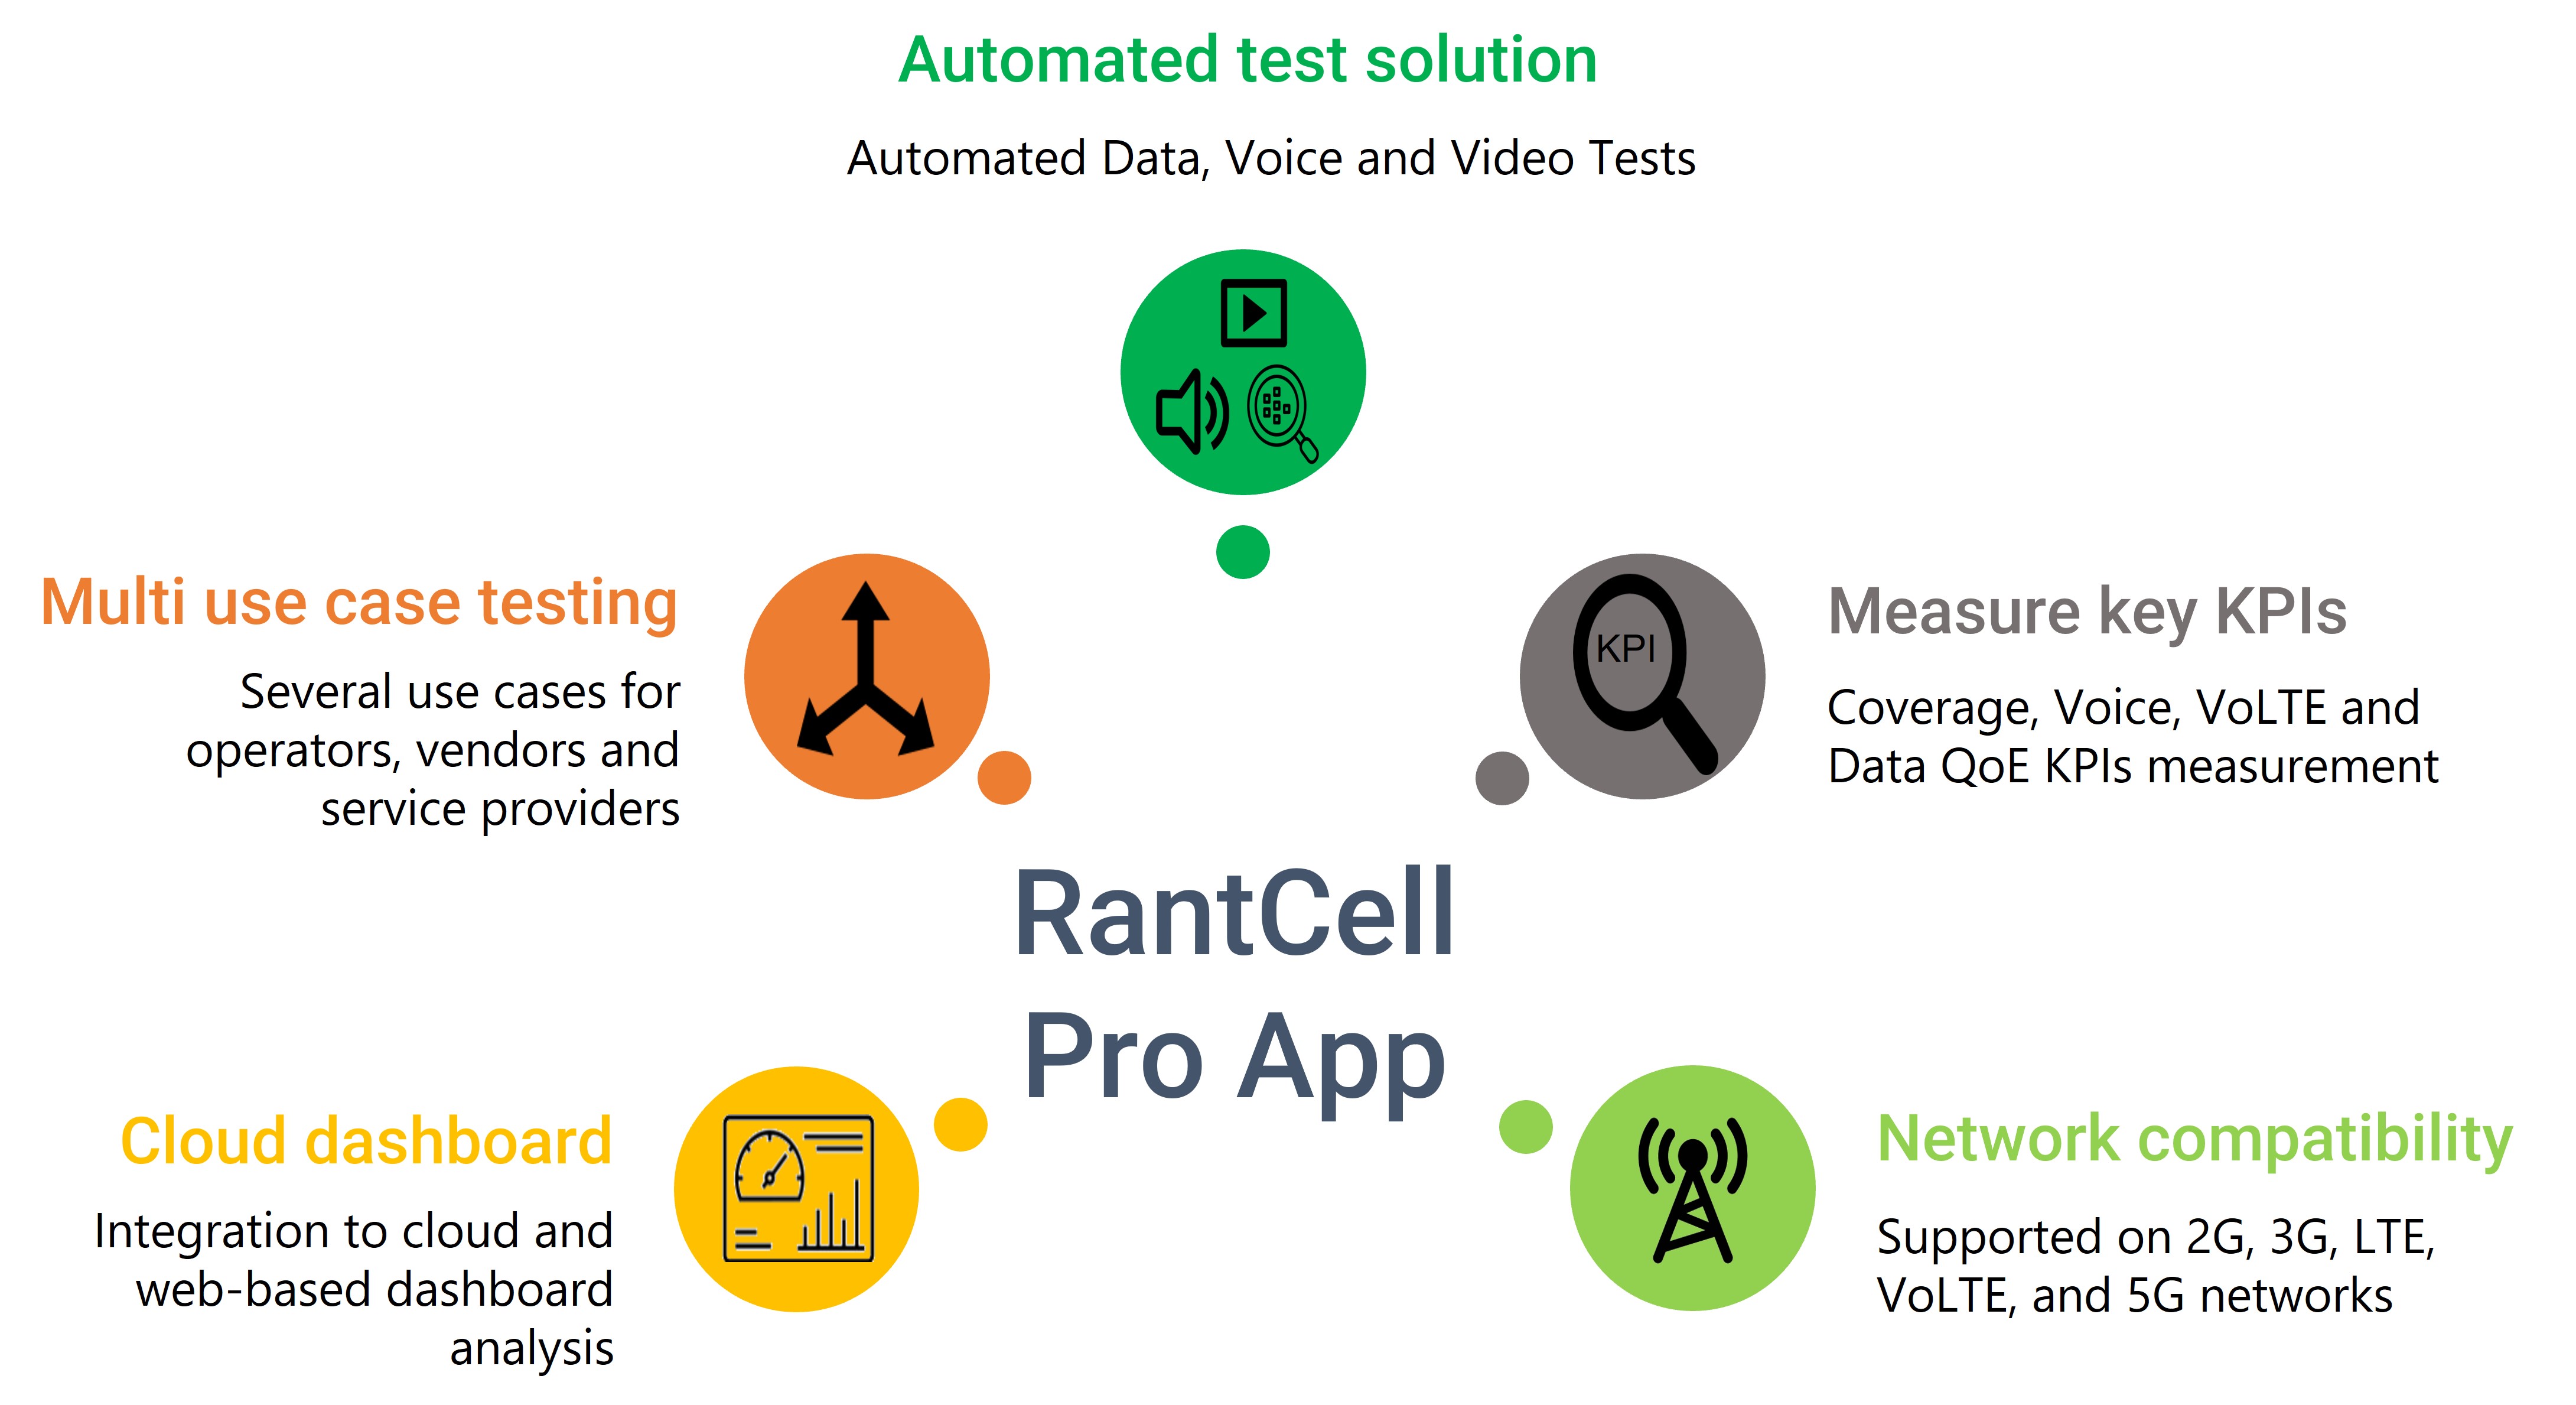 about rantcell